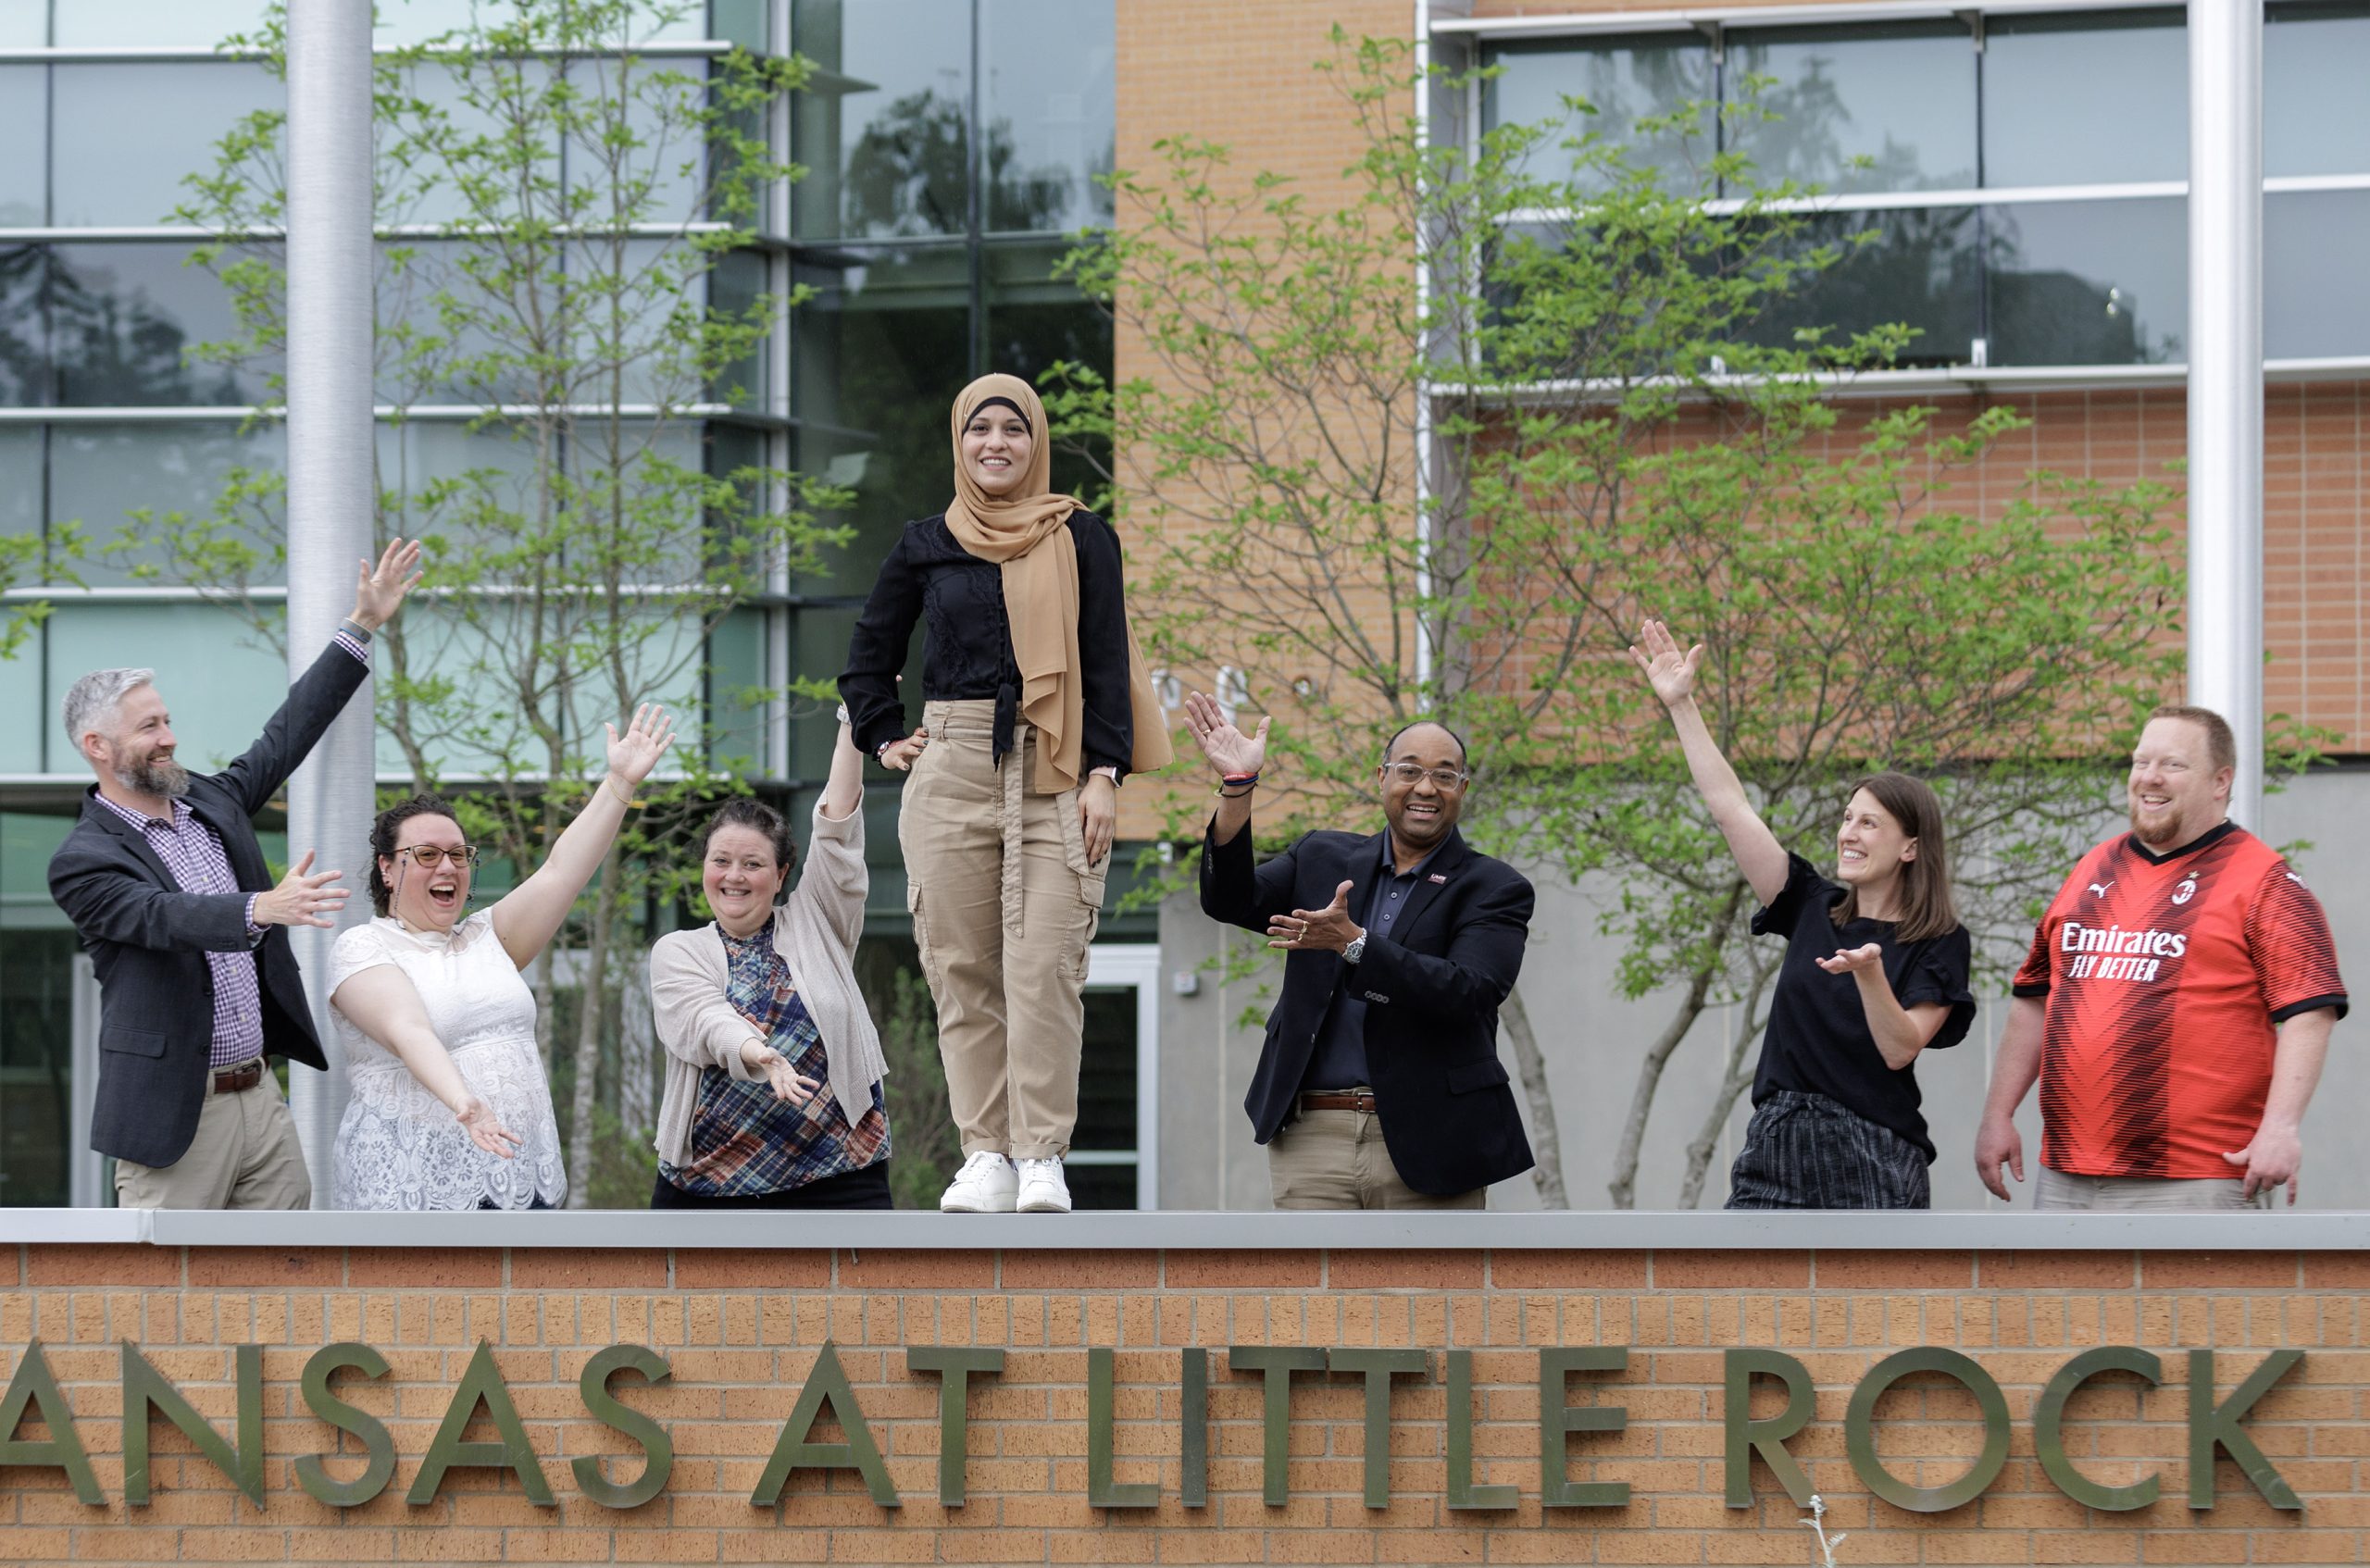 Graduating Doctoral Student Ronia Kattoum is surrounded by her colleagues at the University of Arkansas at Little Rock. Photo by Ben Krain.